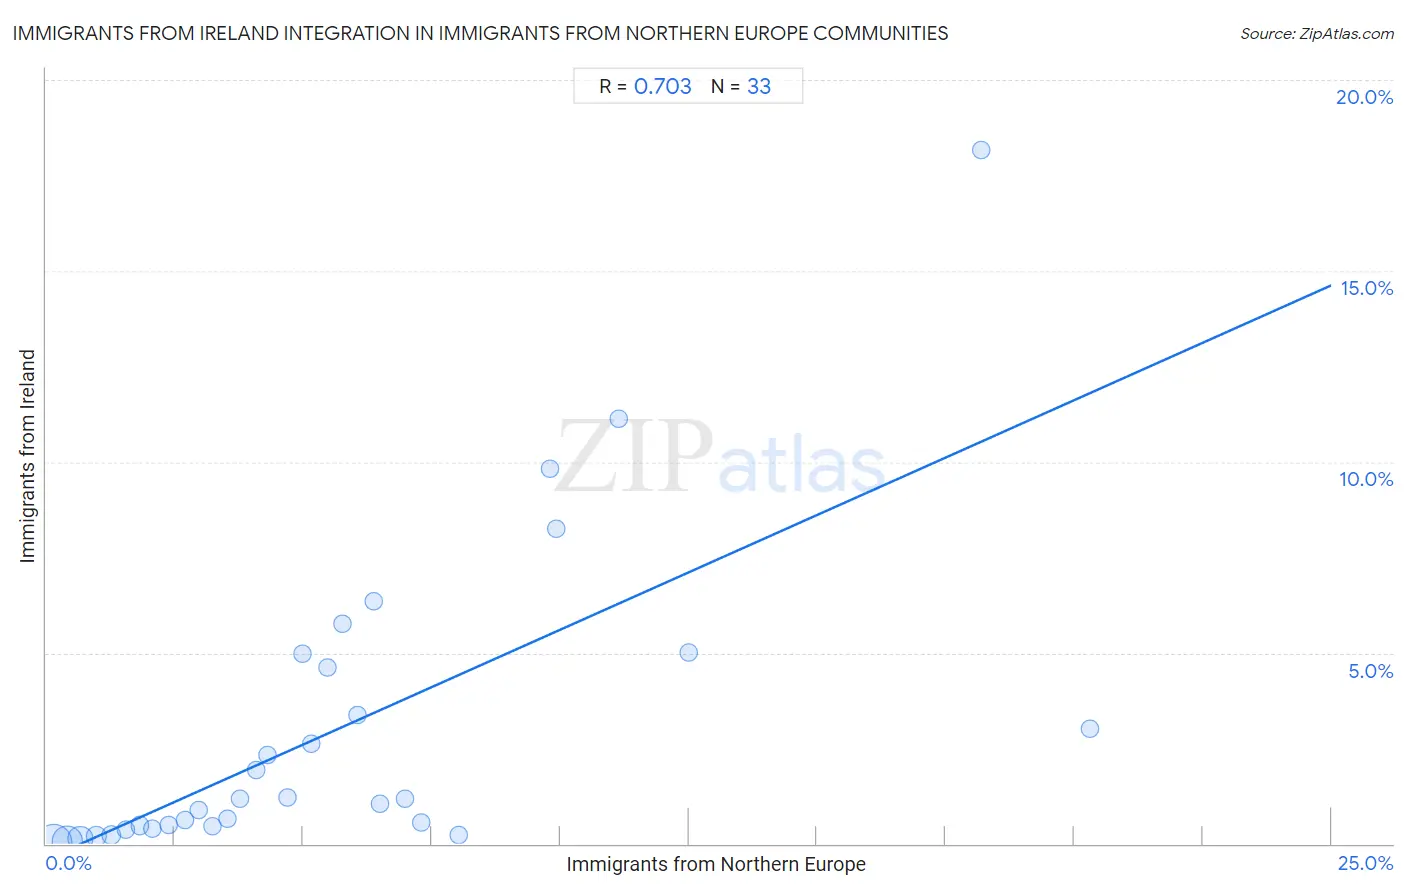 Immigrants from Northern Europe Integration in Immigrants from Ireland Communities